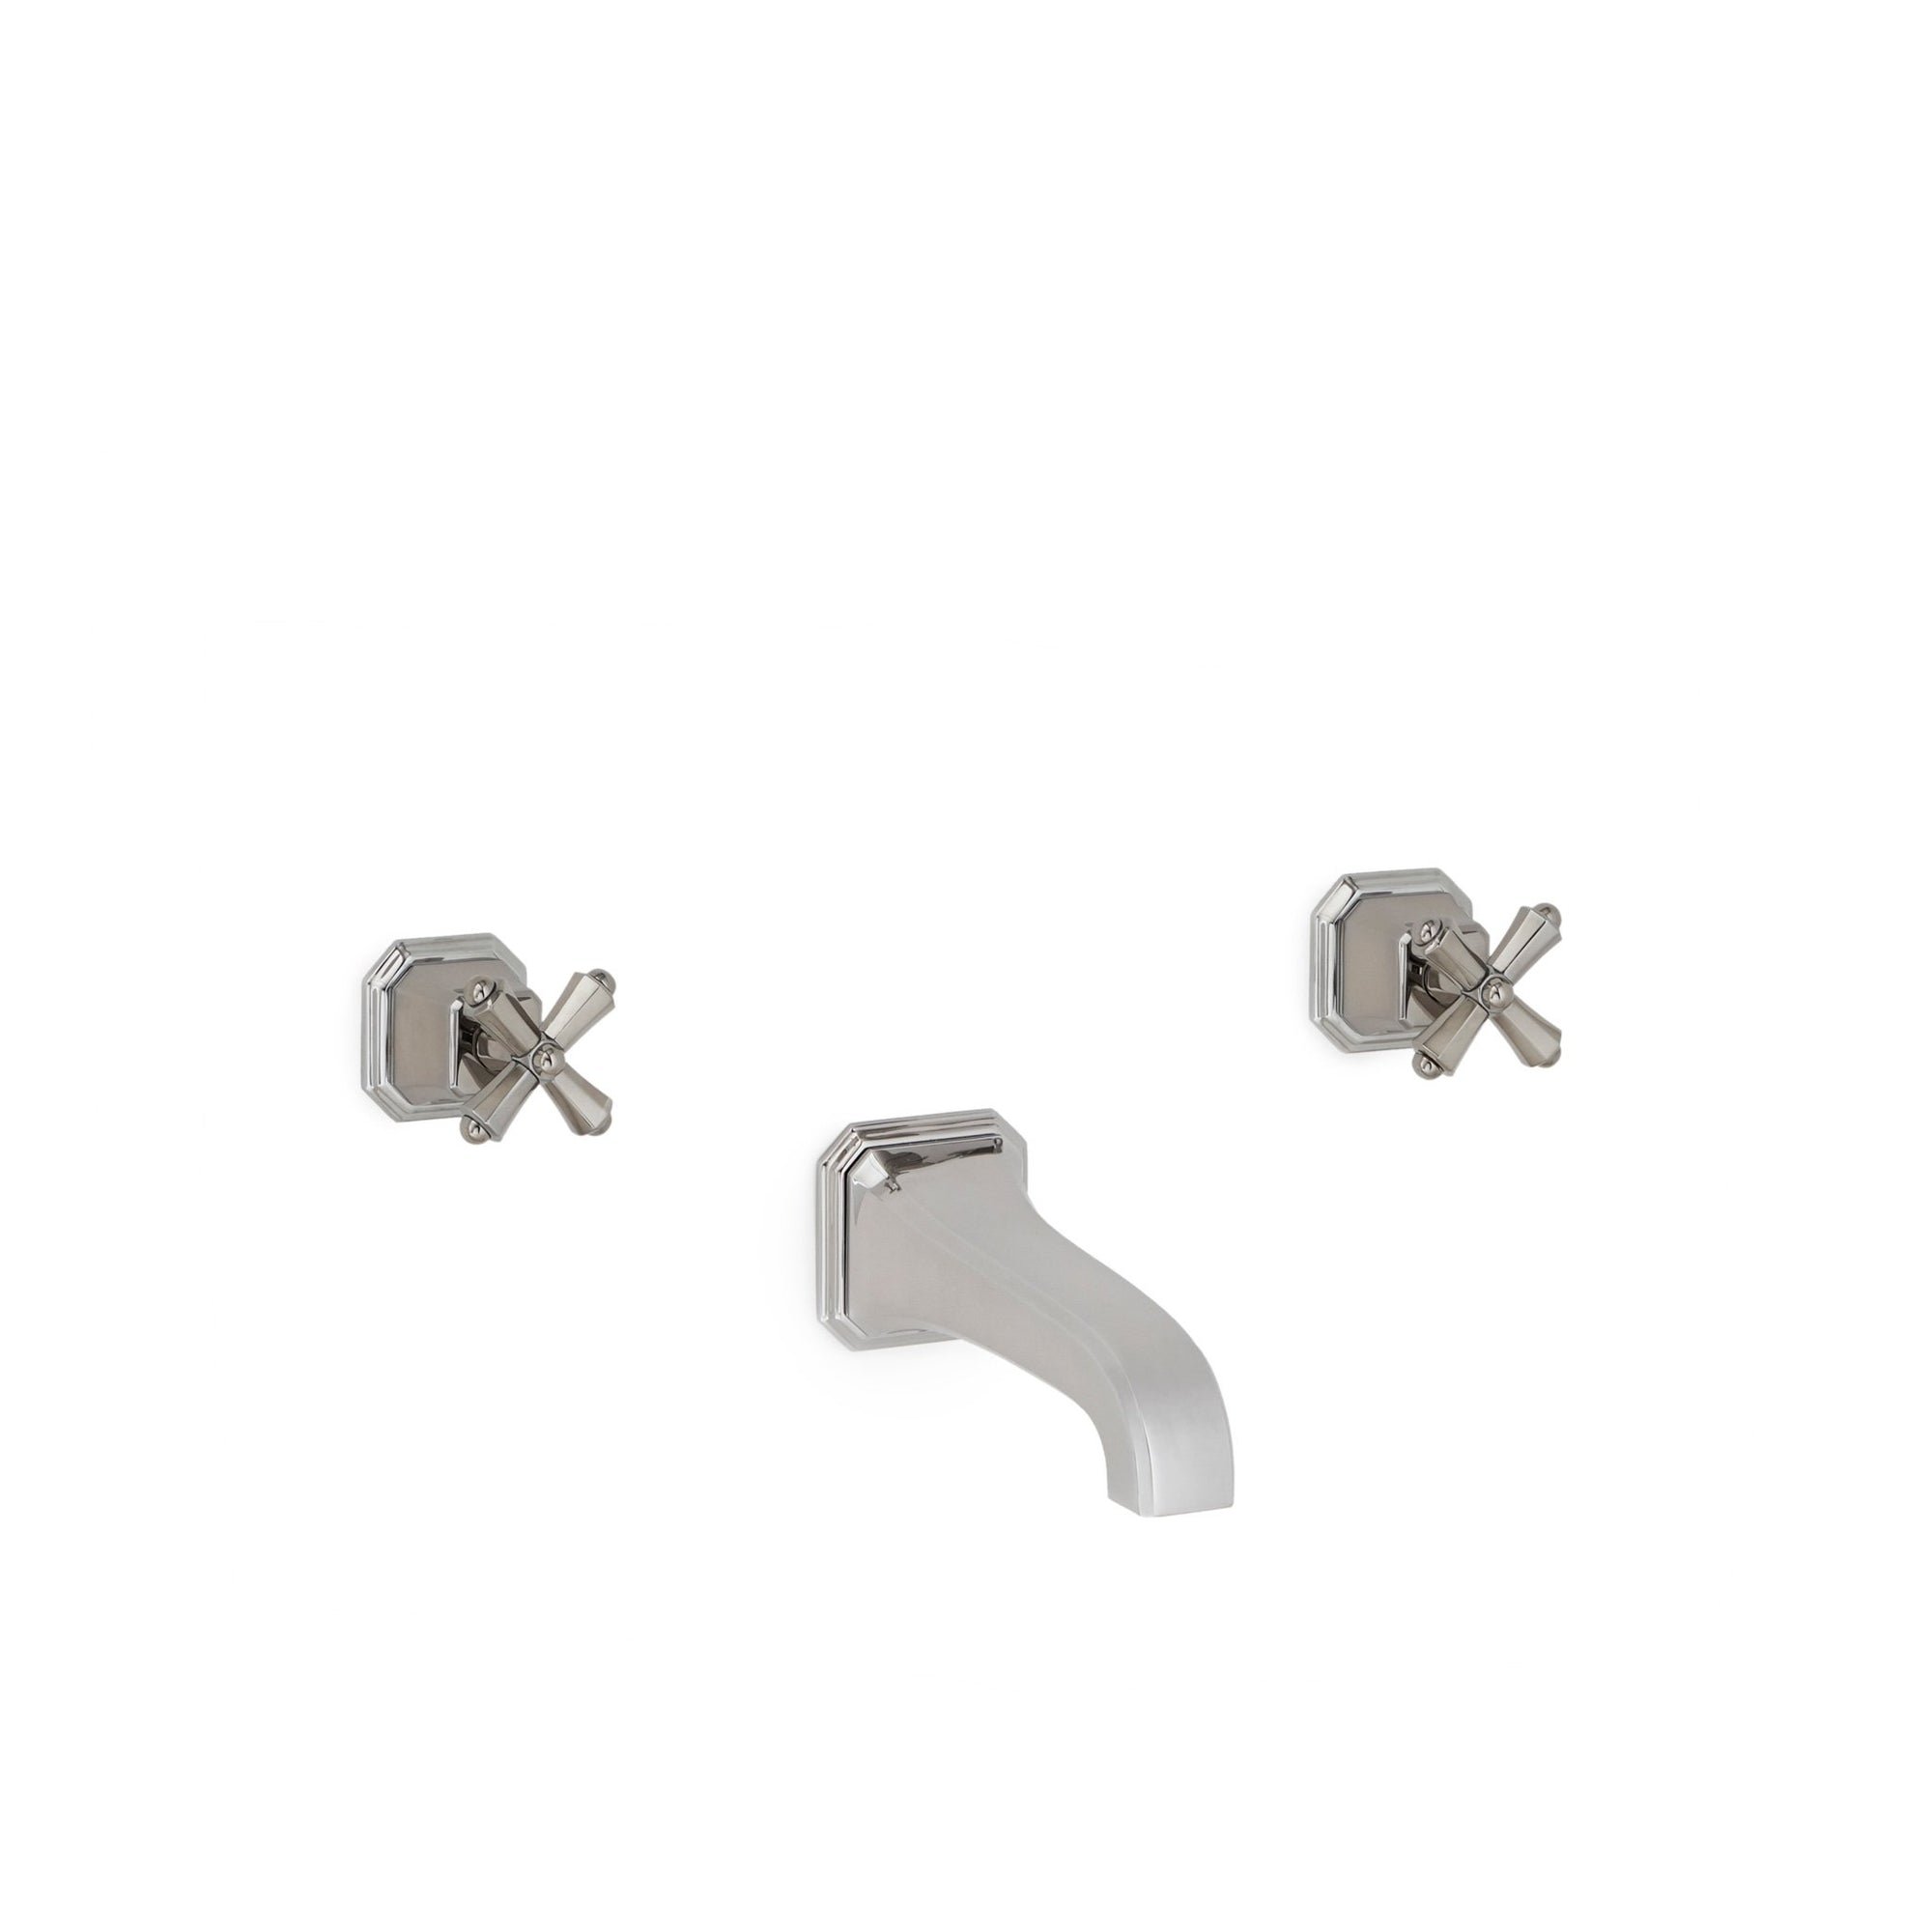 0981TUB824-S-CP Sherle Wagner International Harrison Cross Handle Wall Mount Tub Set Small in Polished Chrome metal finish